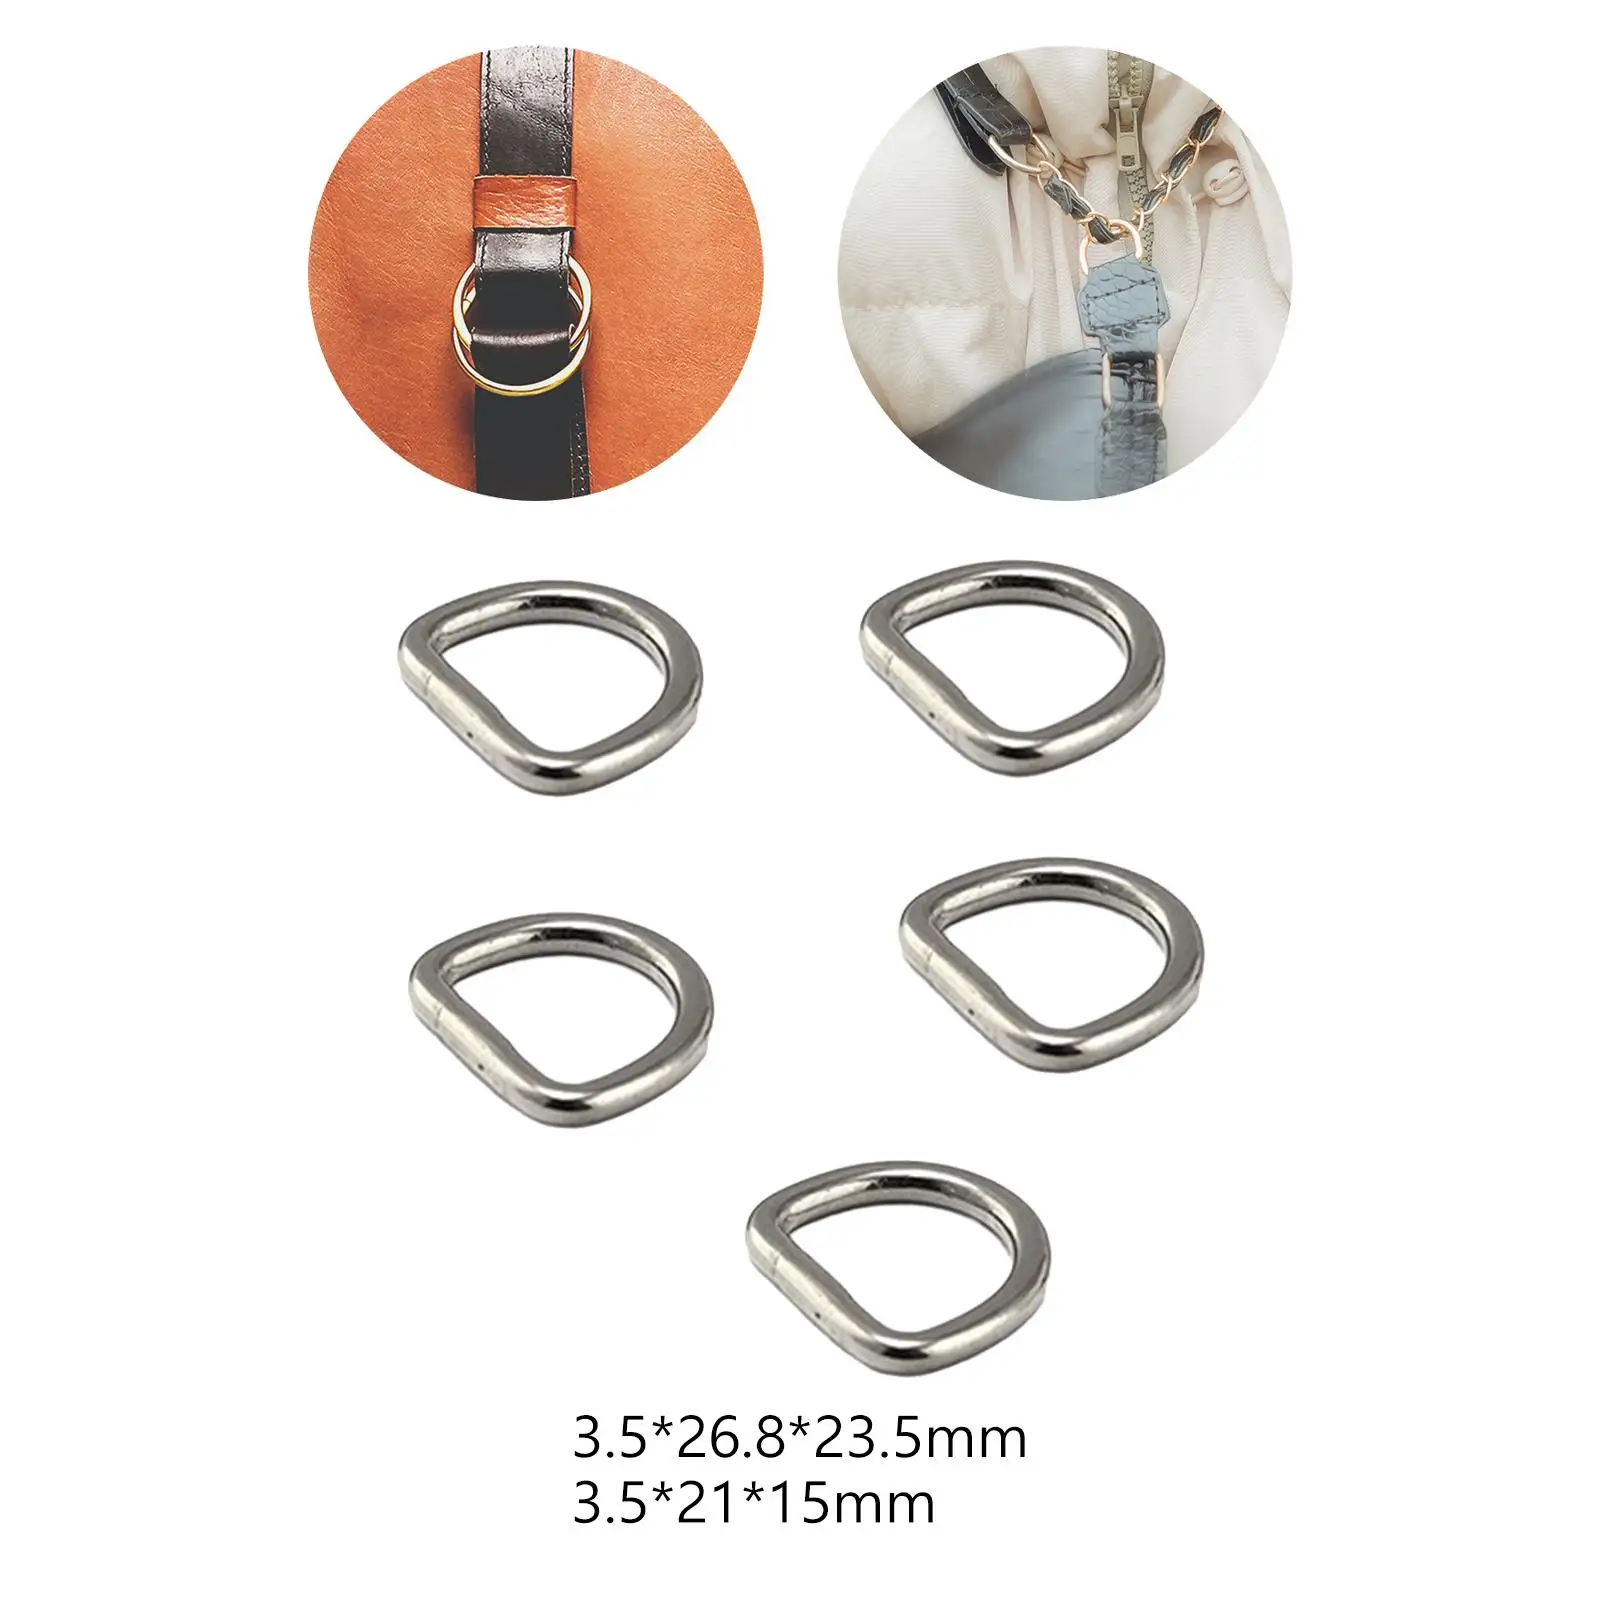 5x Metal D Rings Replacement Heavy Duty Seamless Steel D Hook Buckle for Hammock Pets Collars Keychains Bag Straps Purses